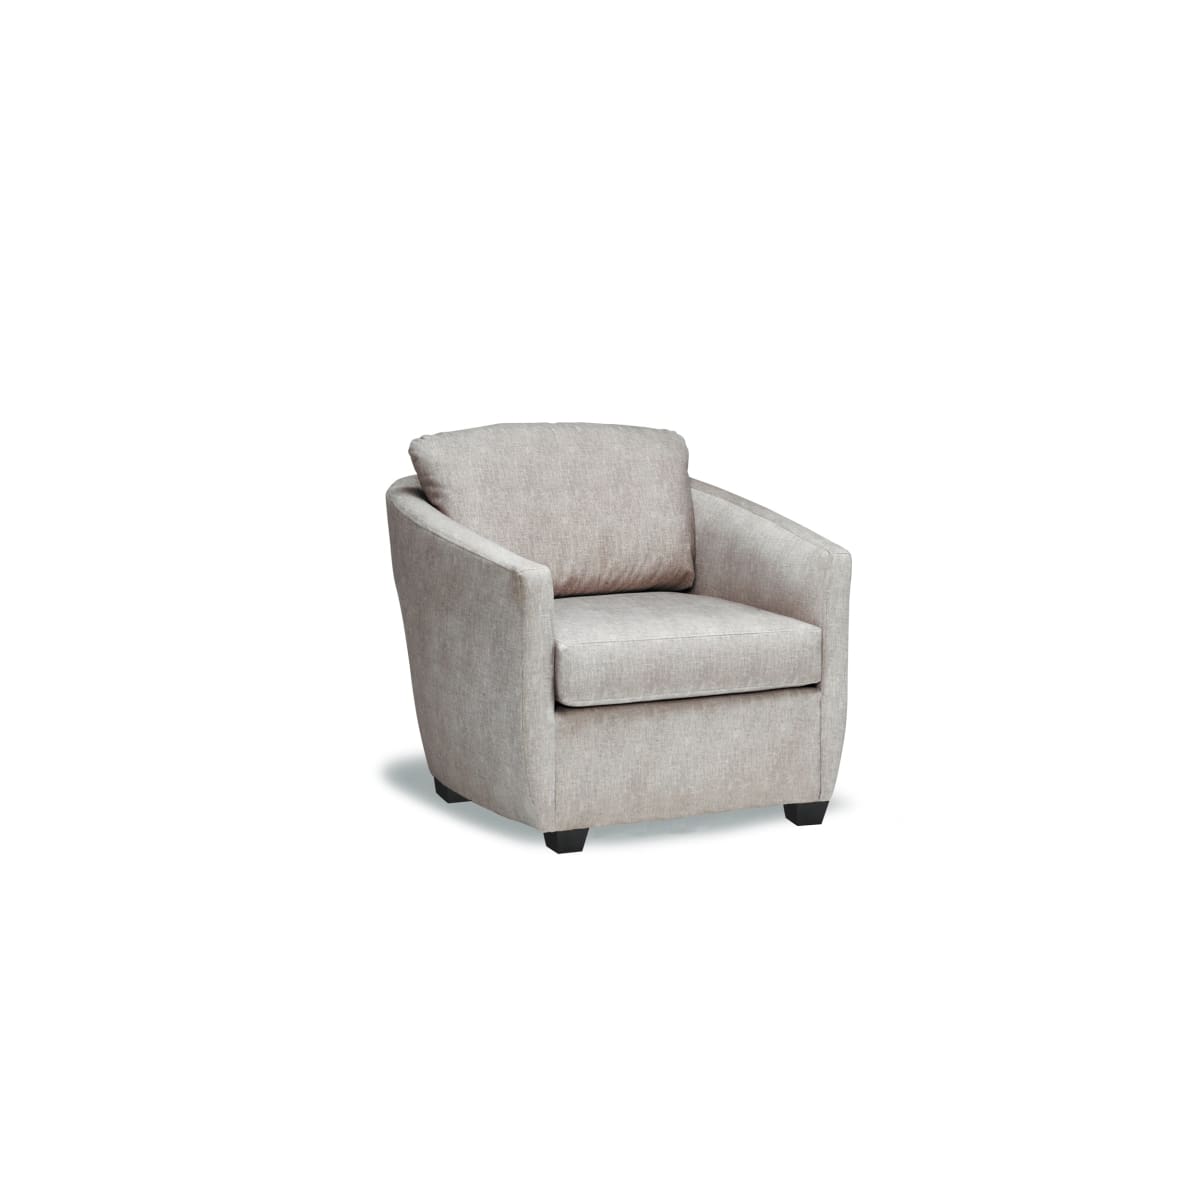 Lilly Accent Chair - 31x36x33 - accent chairs